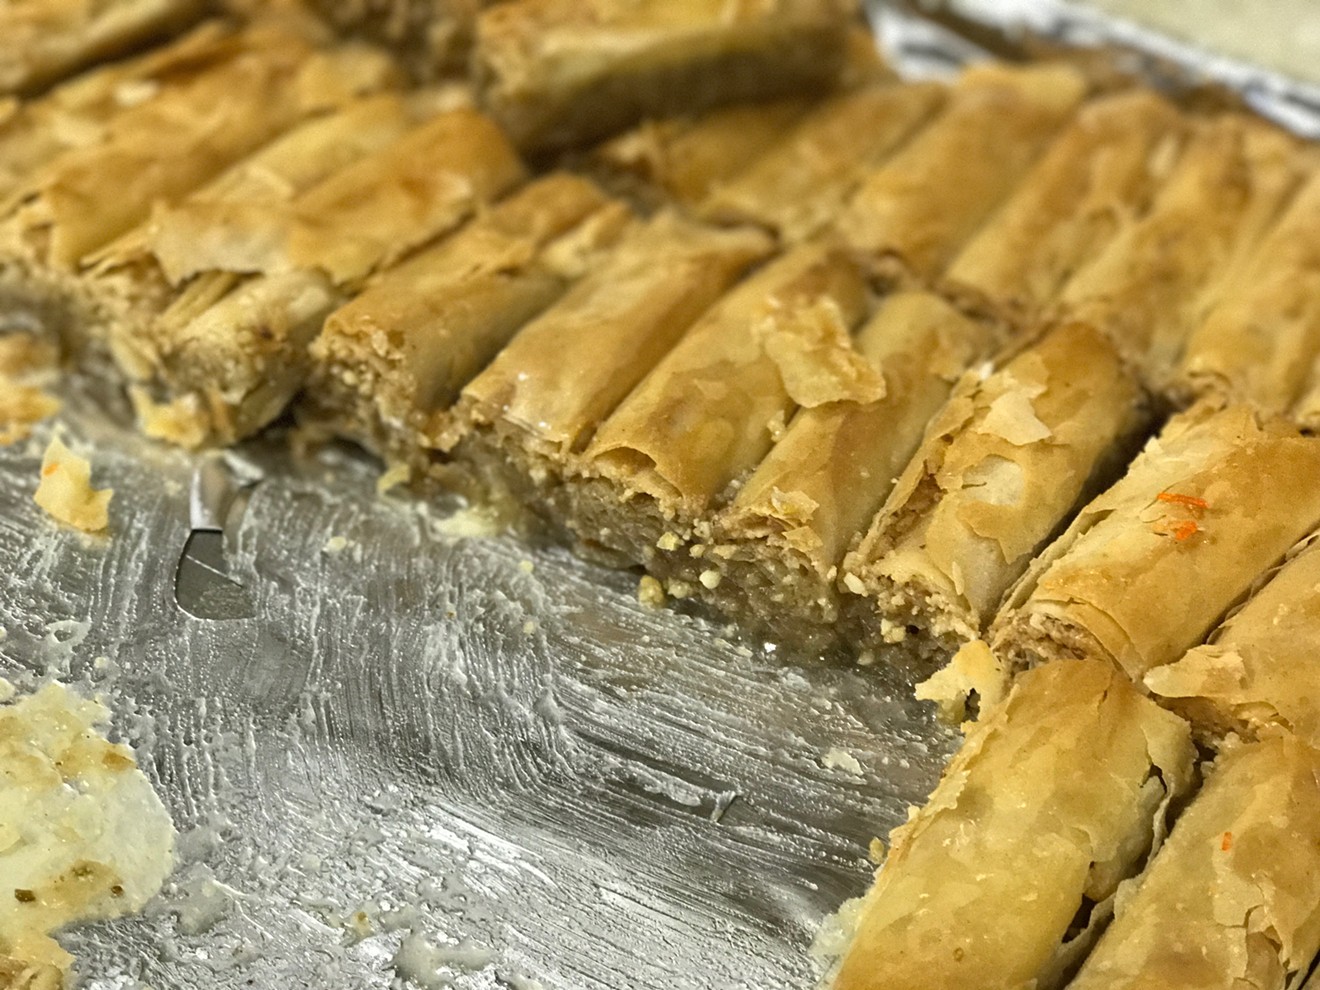 The baklava at Bilad Bakery & Restaurant in Richardson is some of the best in DFW.